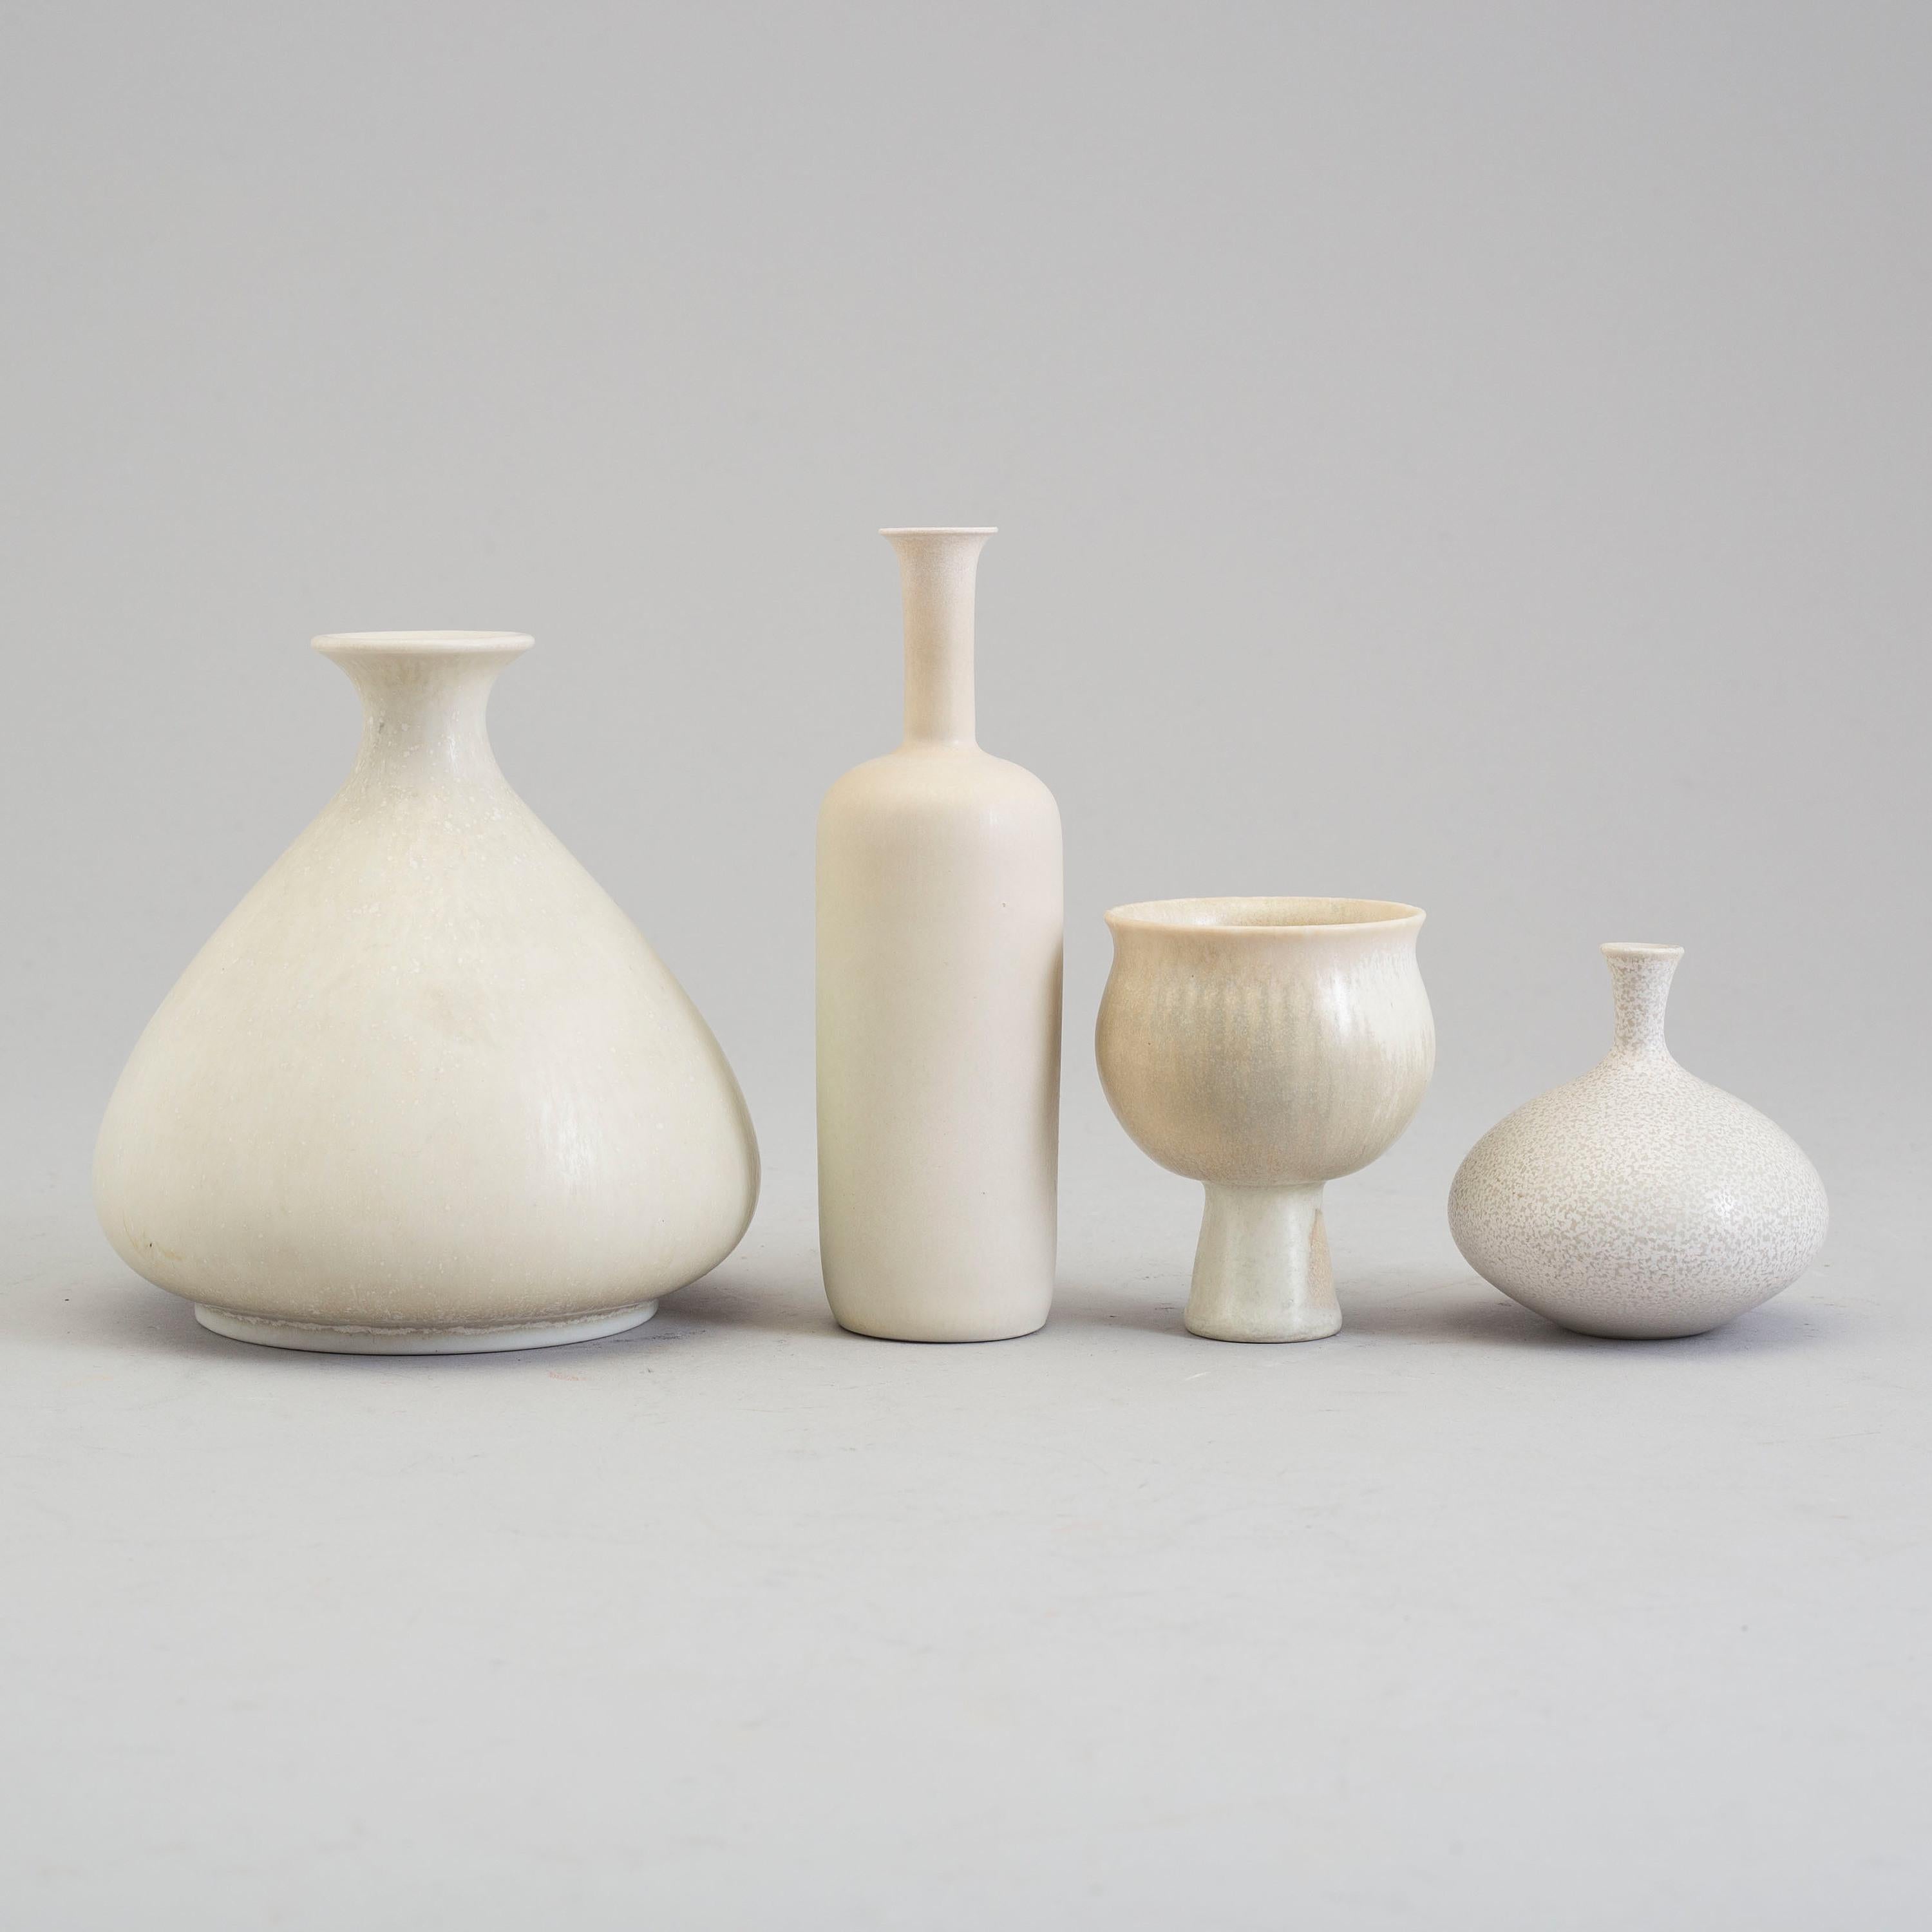 Gunnar Nylund (Sweden, 1904-1997)
Four small stoneware vases from Rörstrand , white enamel 
Signed on back with 